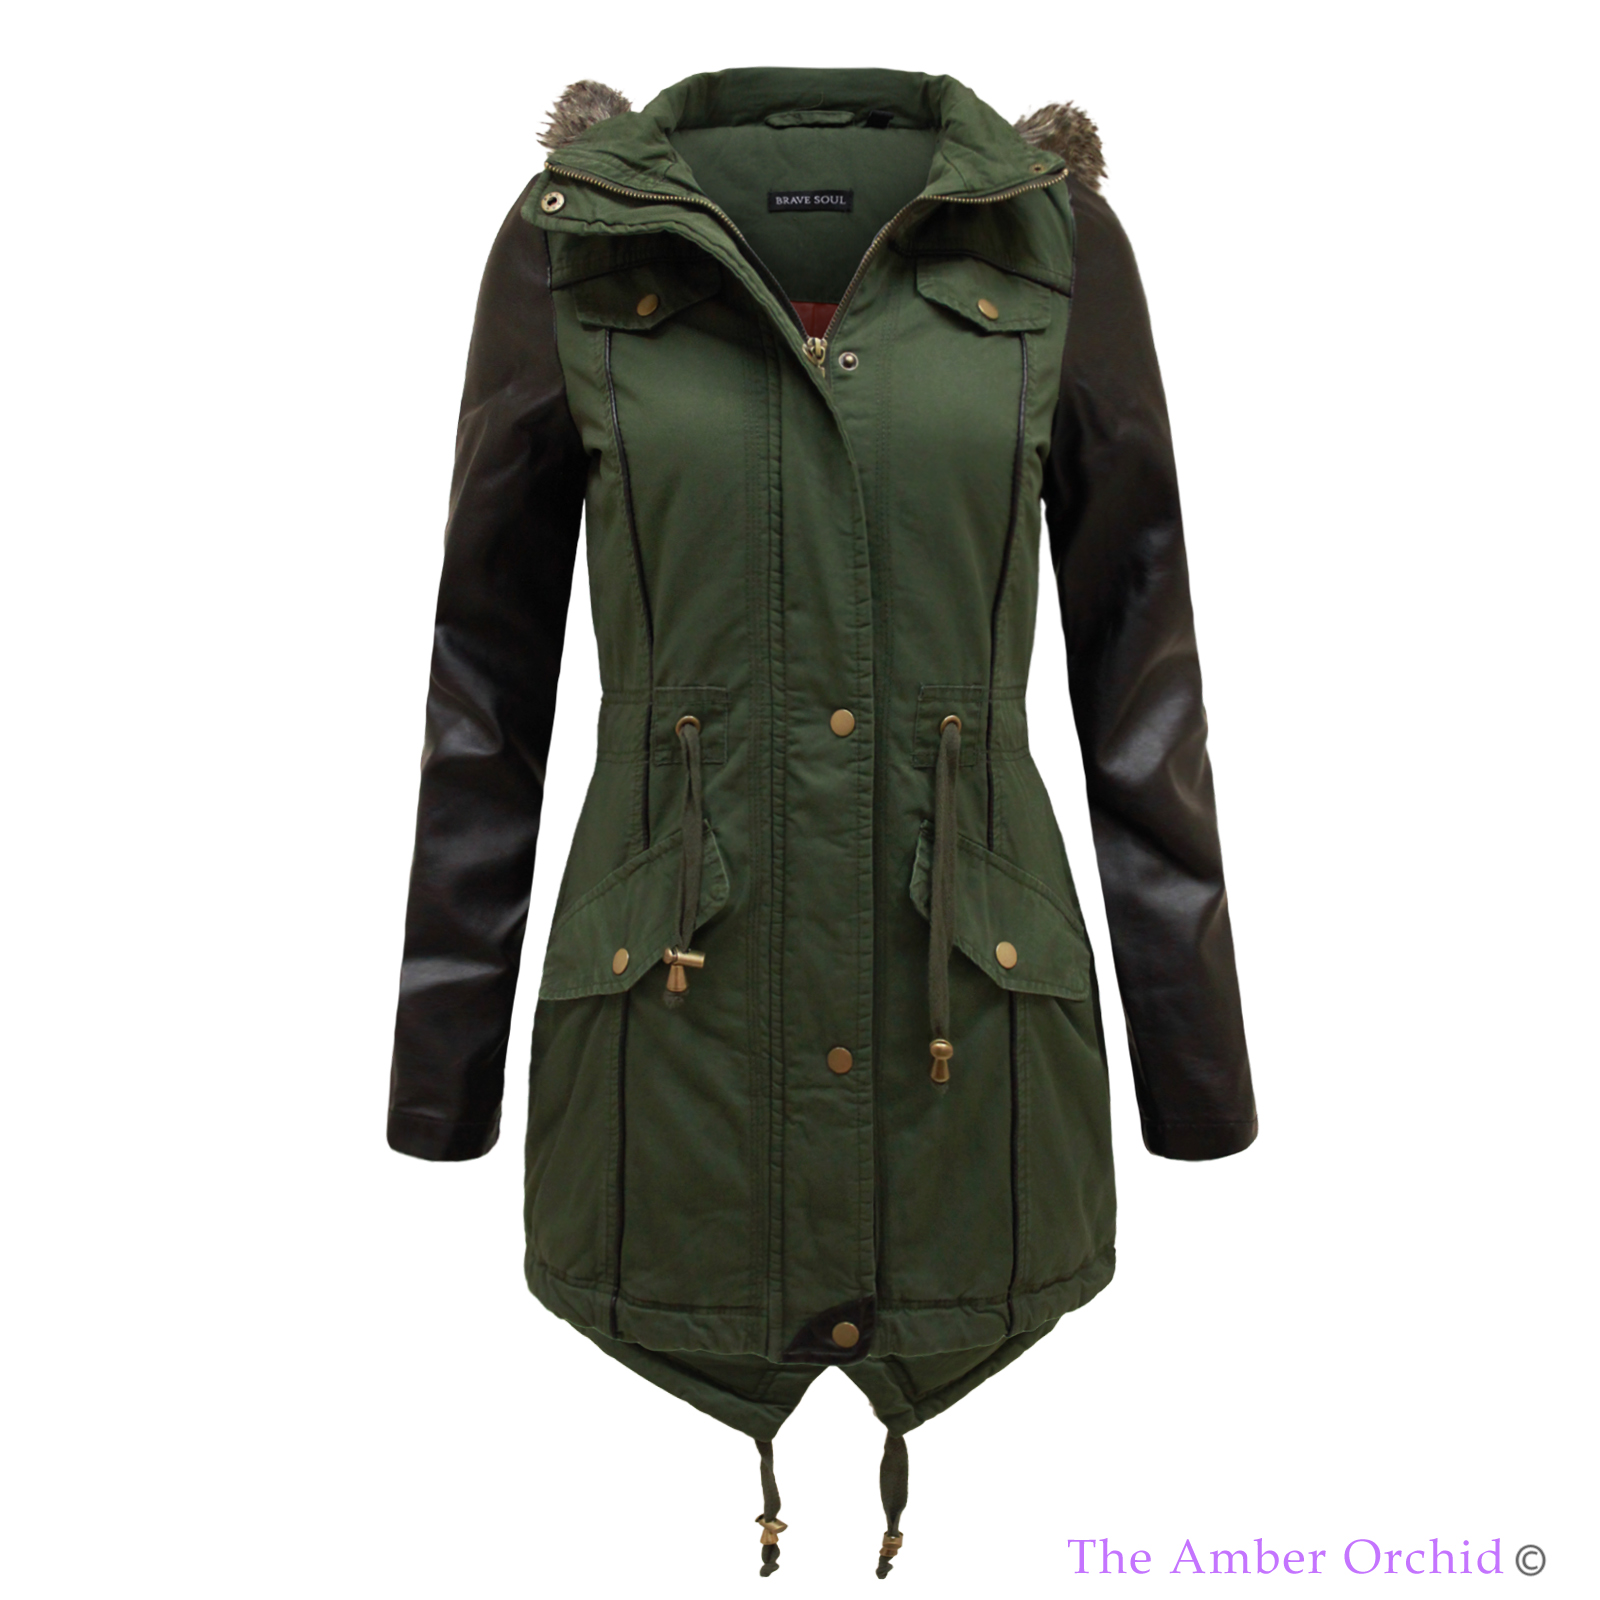 LADIES FAUX LEATHER PVC SLEEVE WOMENS FUR HOODED MILITARY PARKA JACKET ...